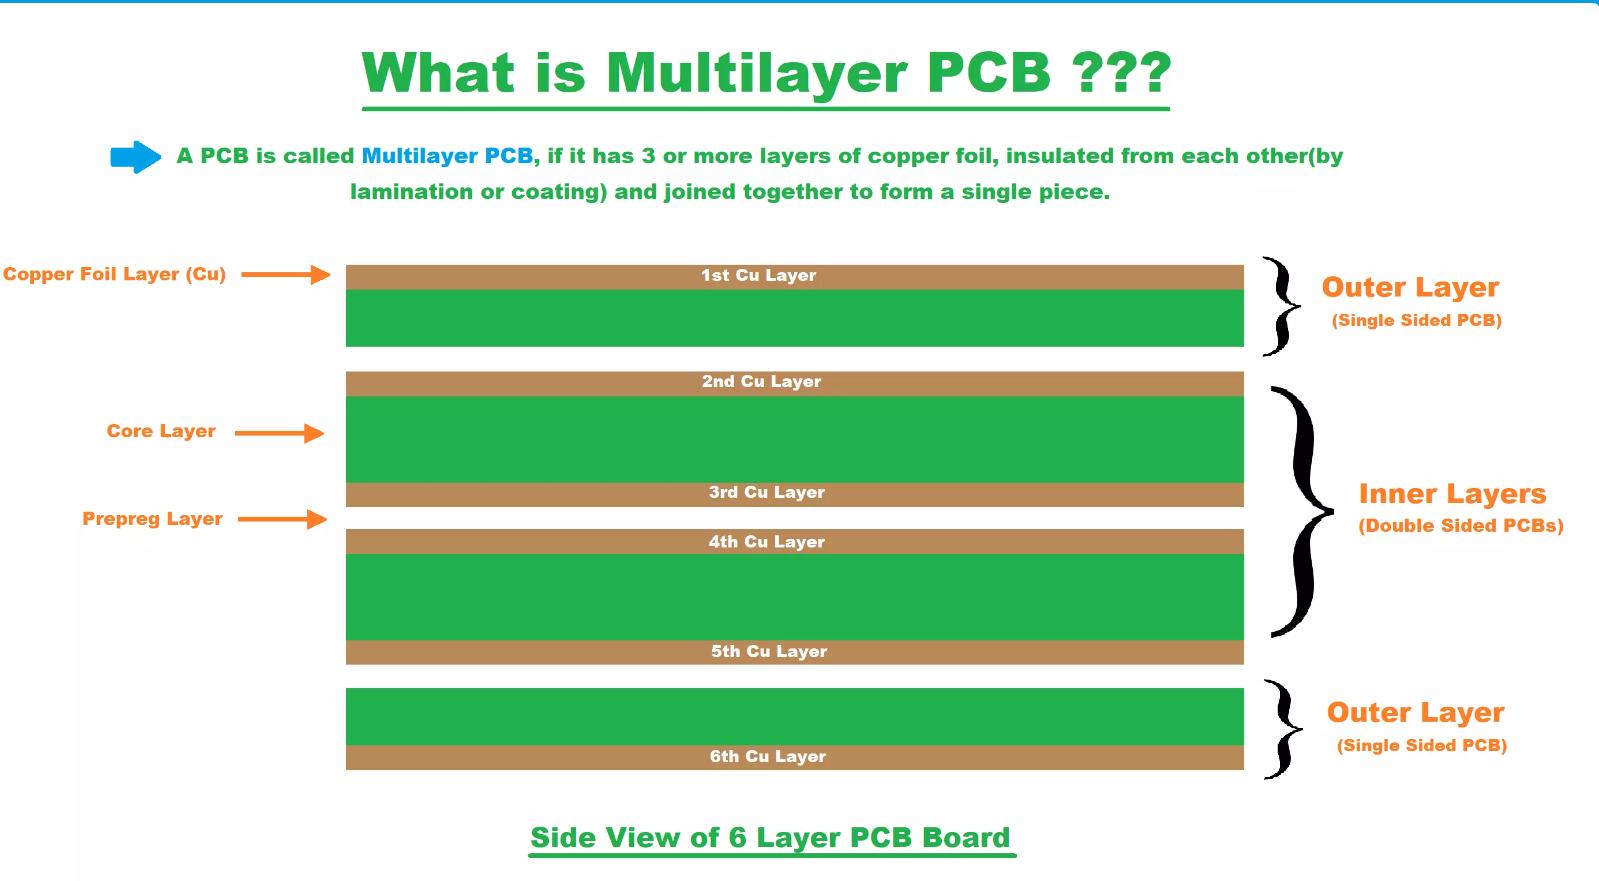 the structure of multilayer PCB